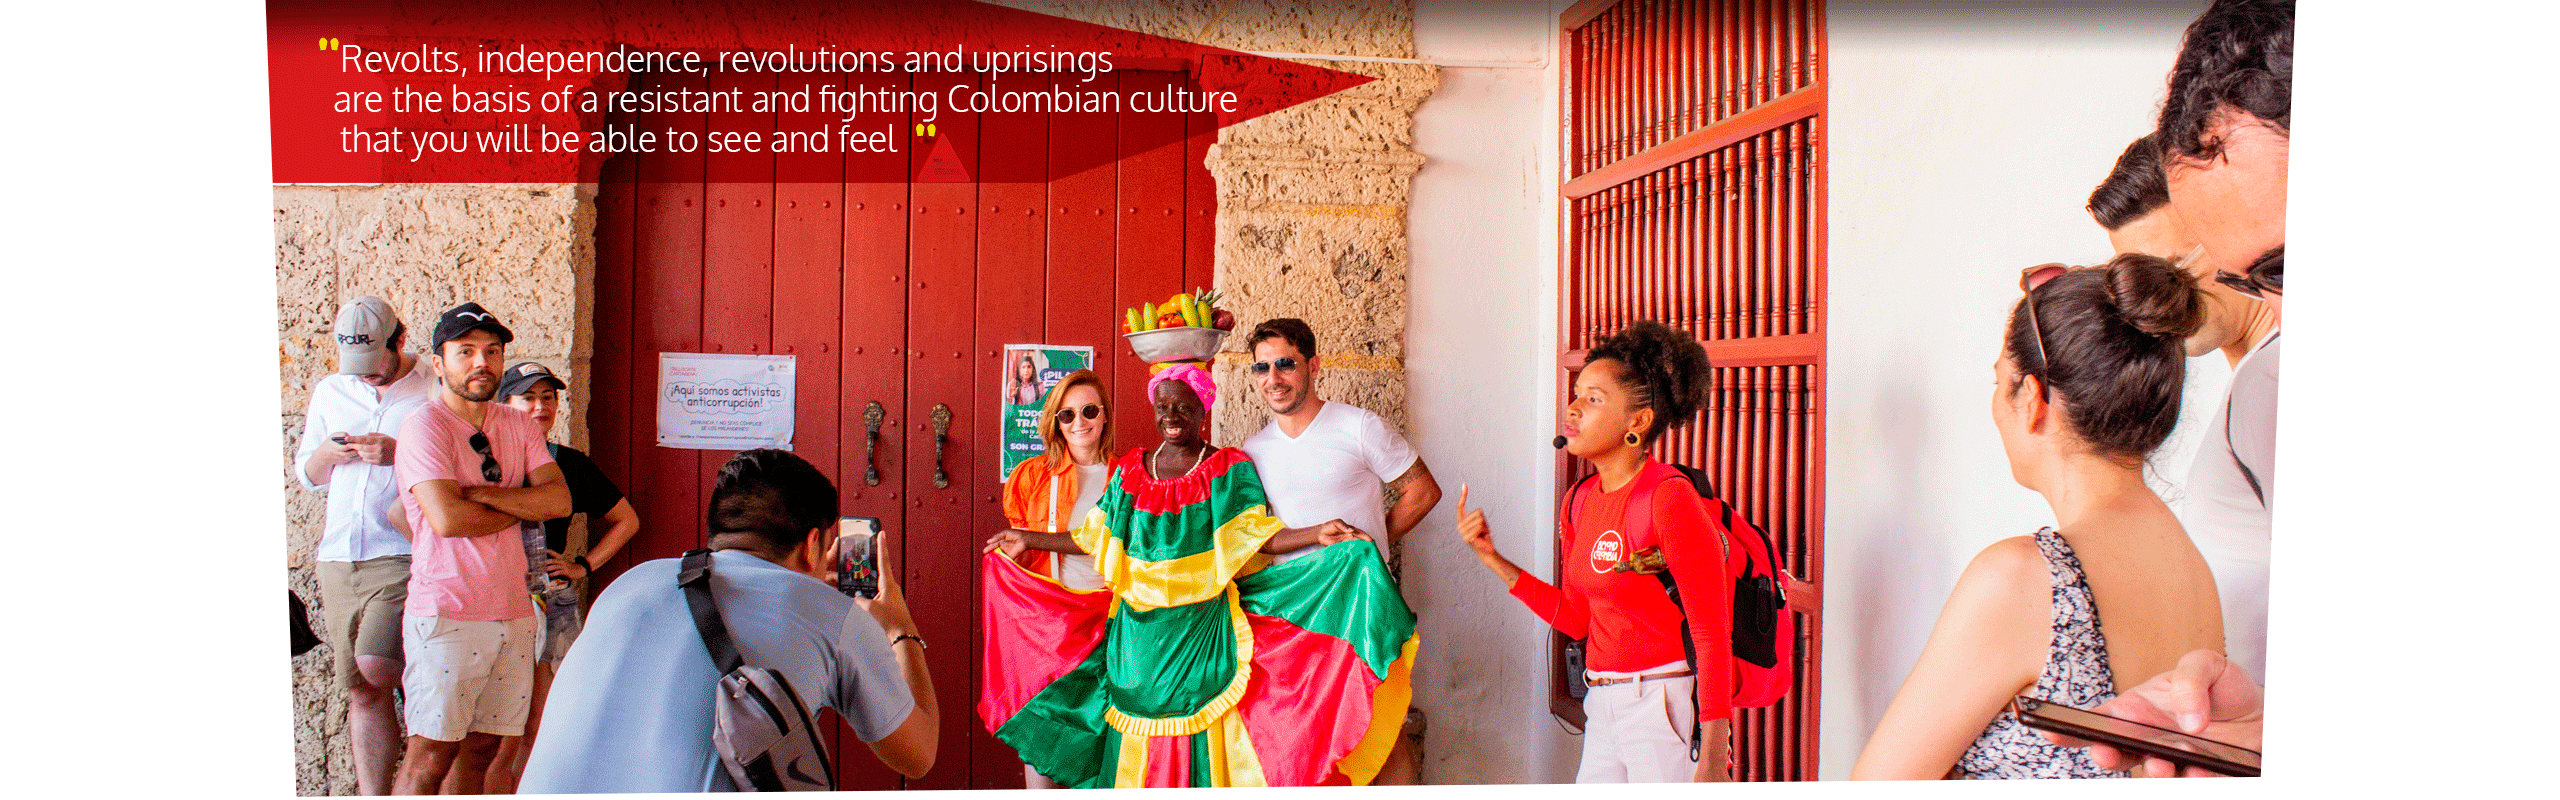 Beyond Colombia Tours | Tour: Free Great Center Tour: Walled City & Getsemani (weekdays)